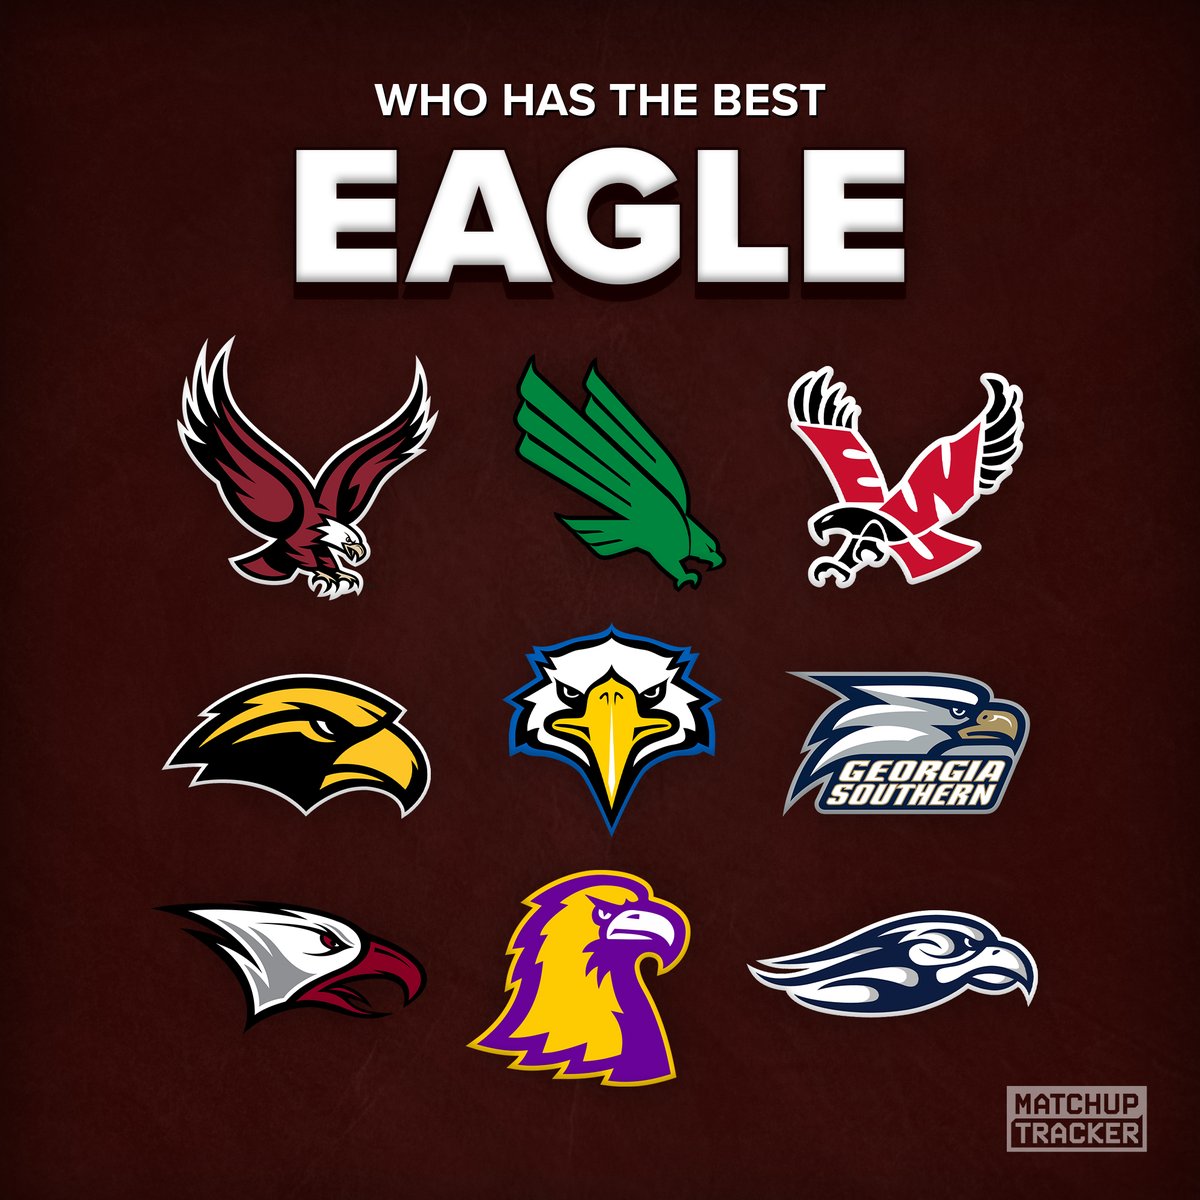 Who has the best eagle logo in CFB? 🦅